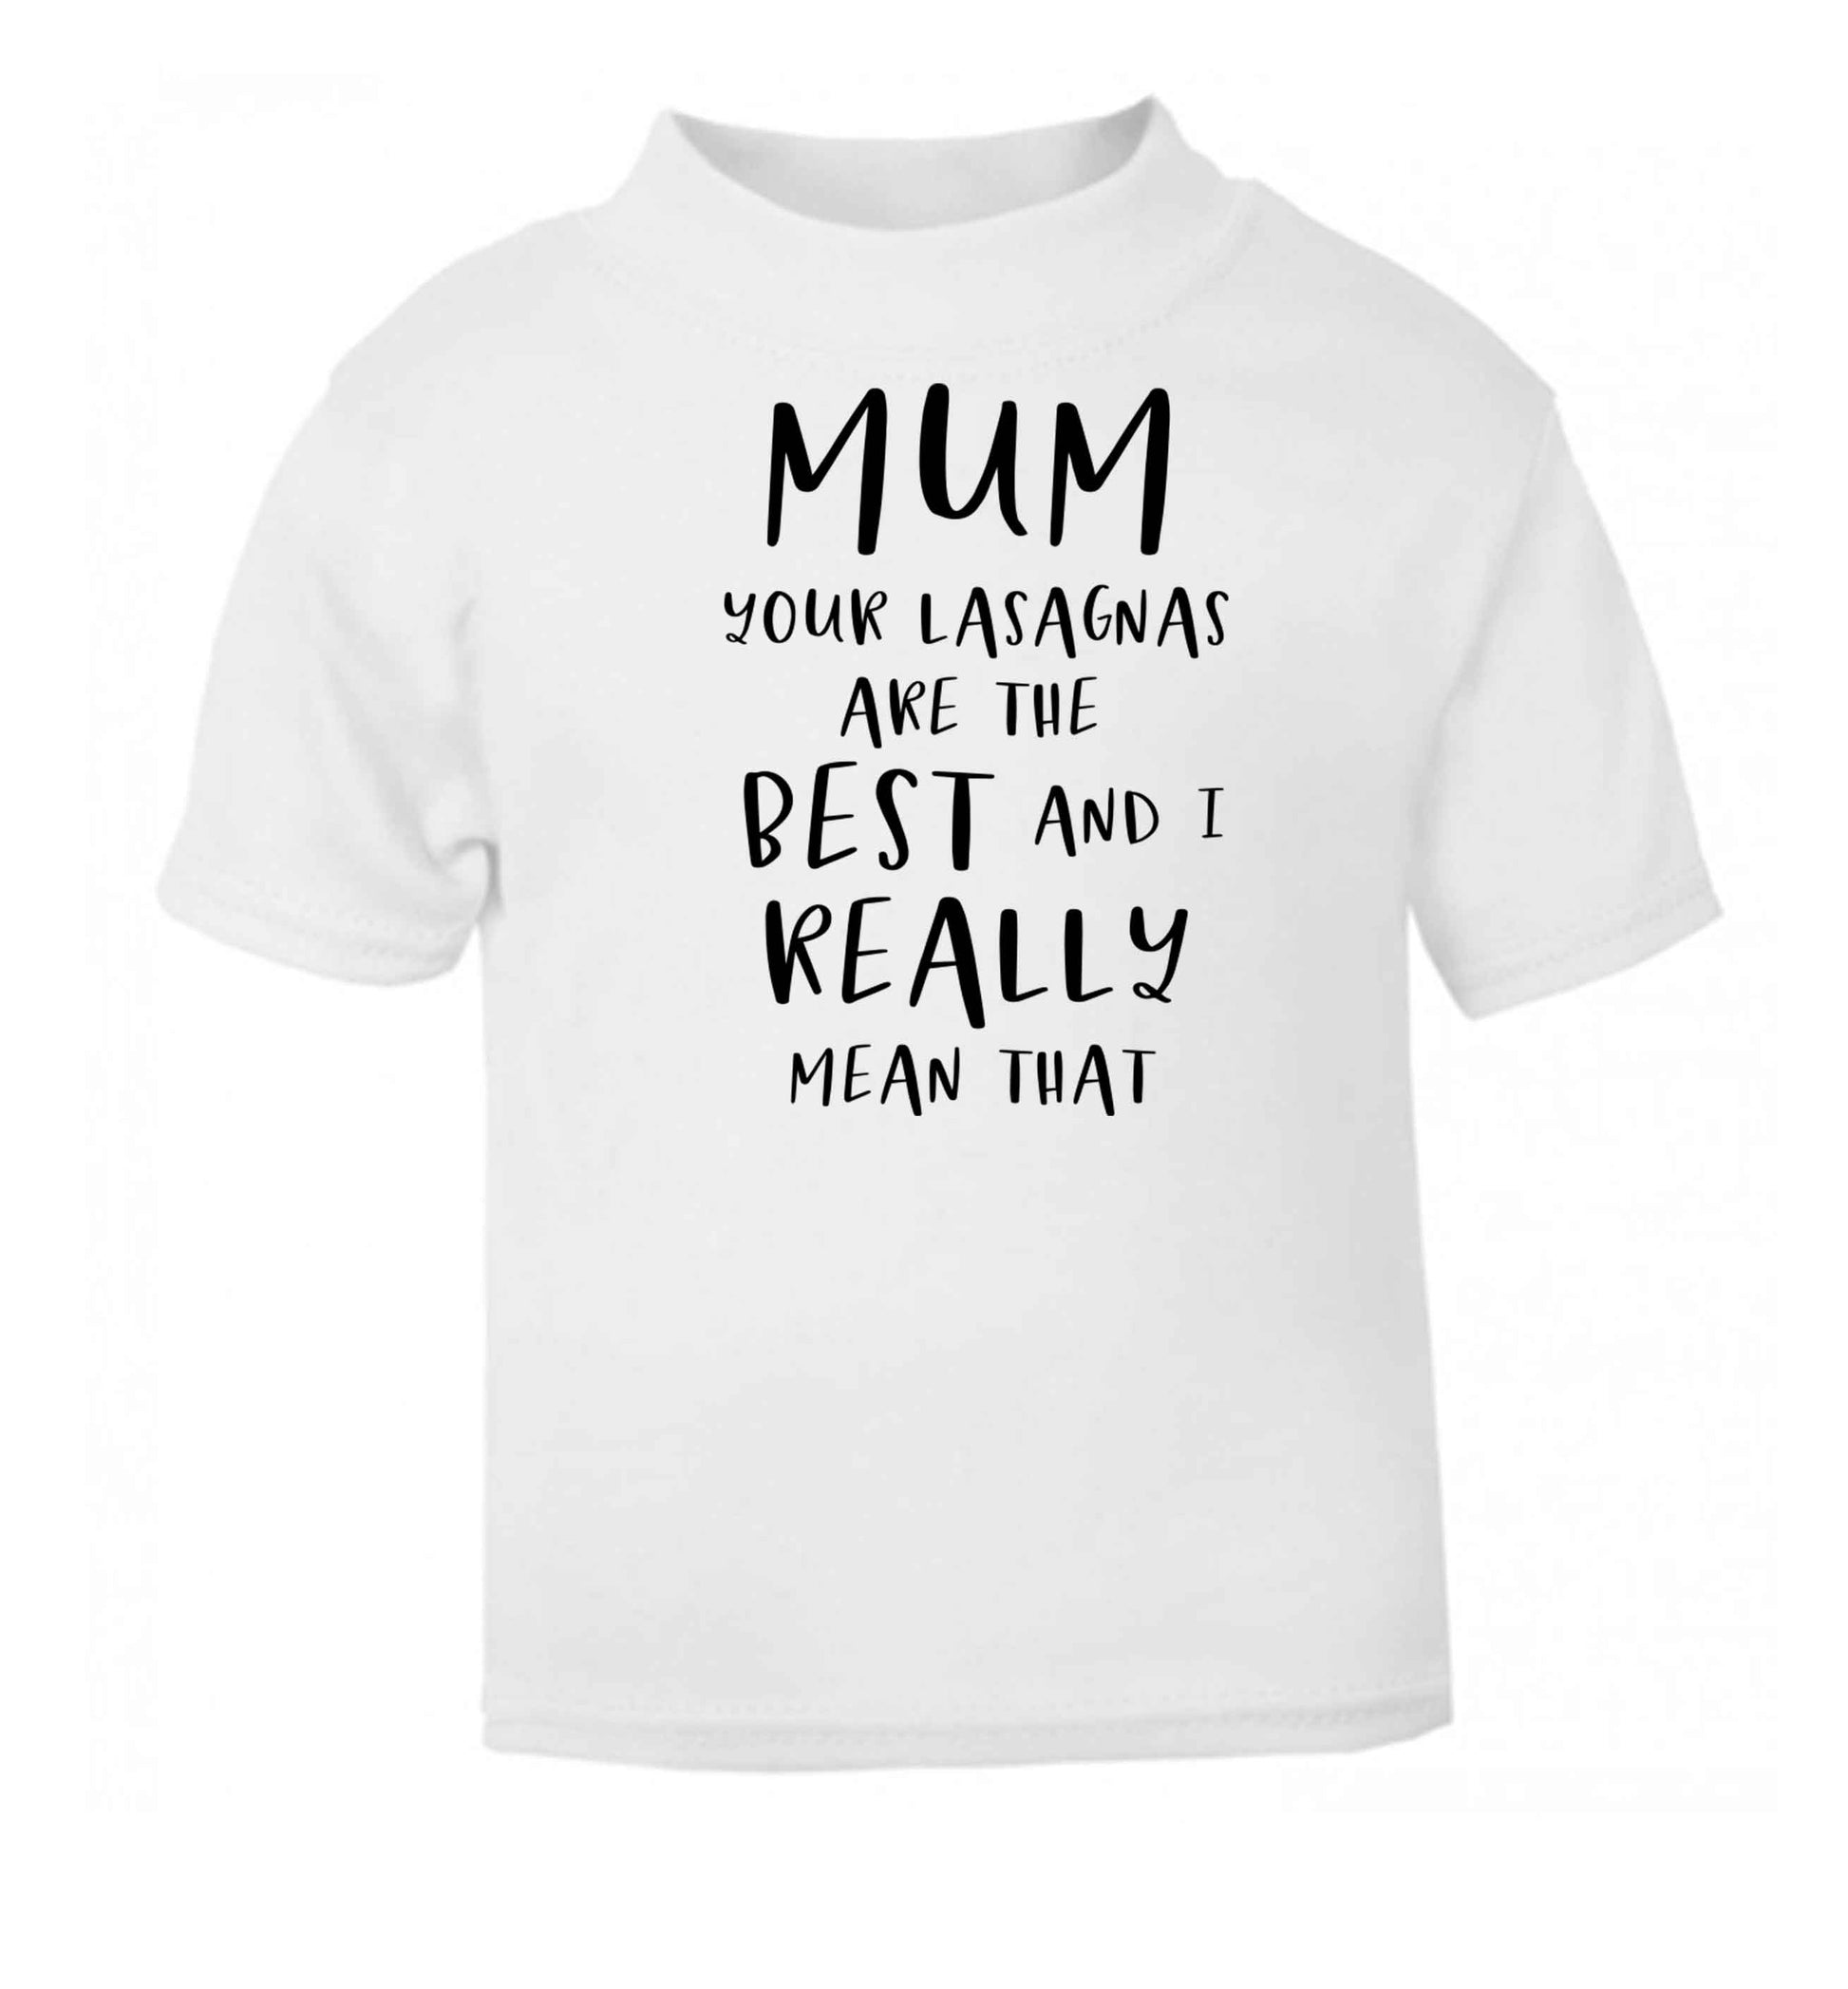 Funny gifts for your mum on mother's dayor her birthday! Mum your lasagnas are the best and I really mean that white baby toddler Tshirt 2 Years